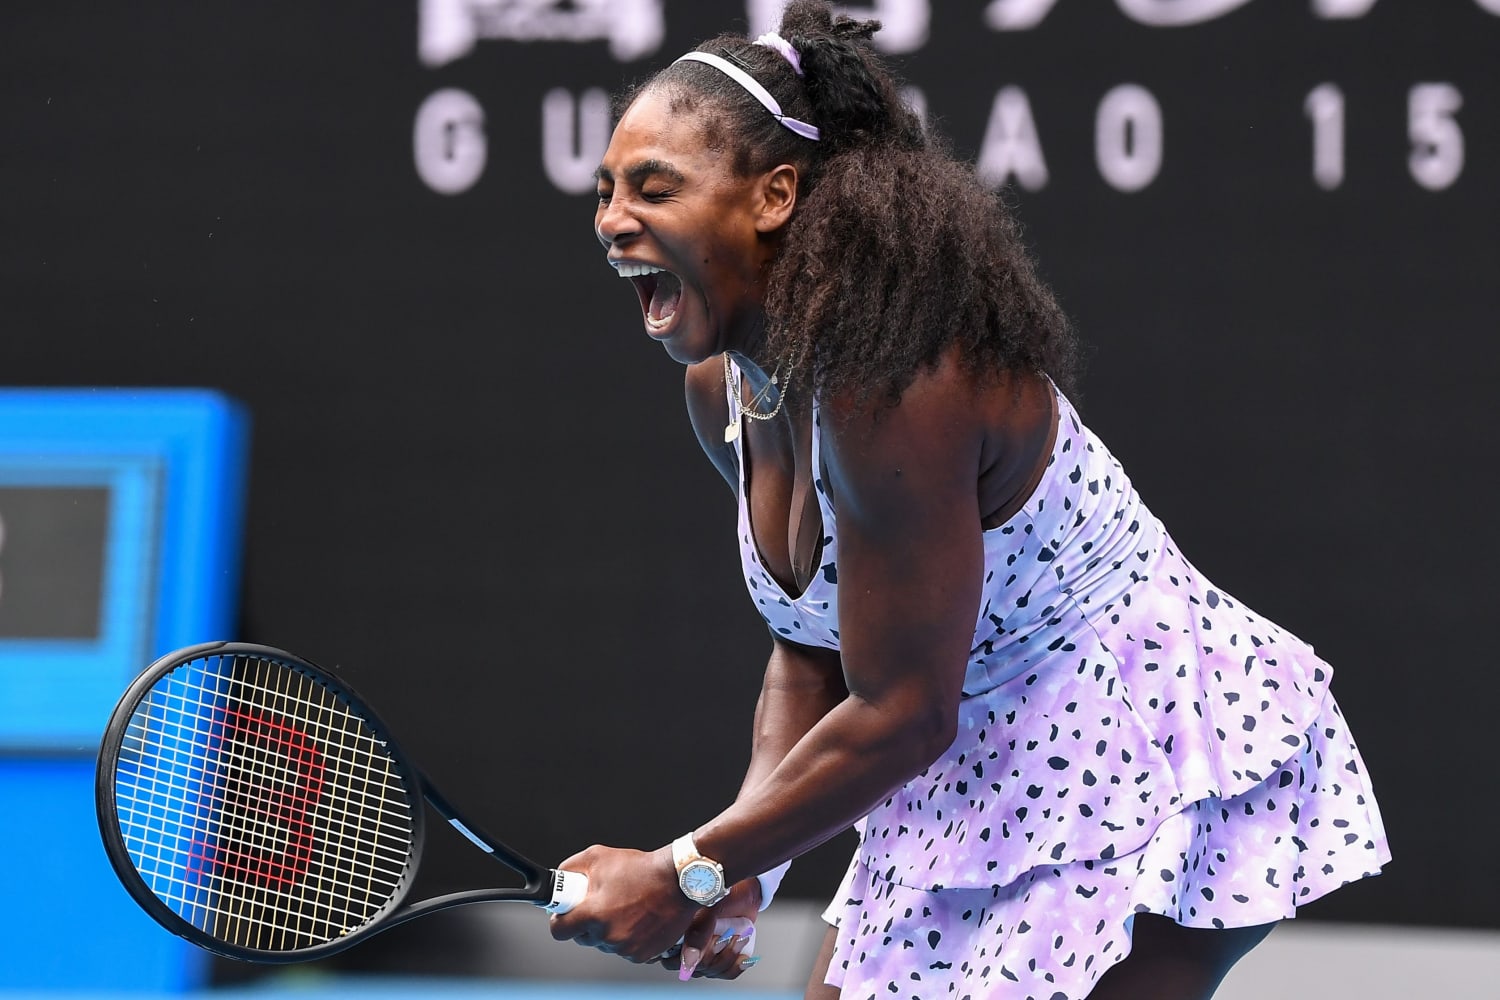 Serena Williams knocked out of Australian Open by 27th-seeded Wang Qiang